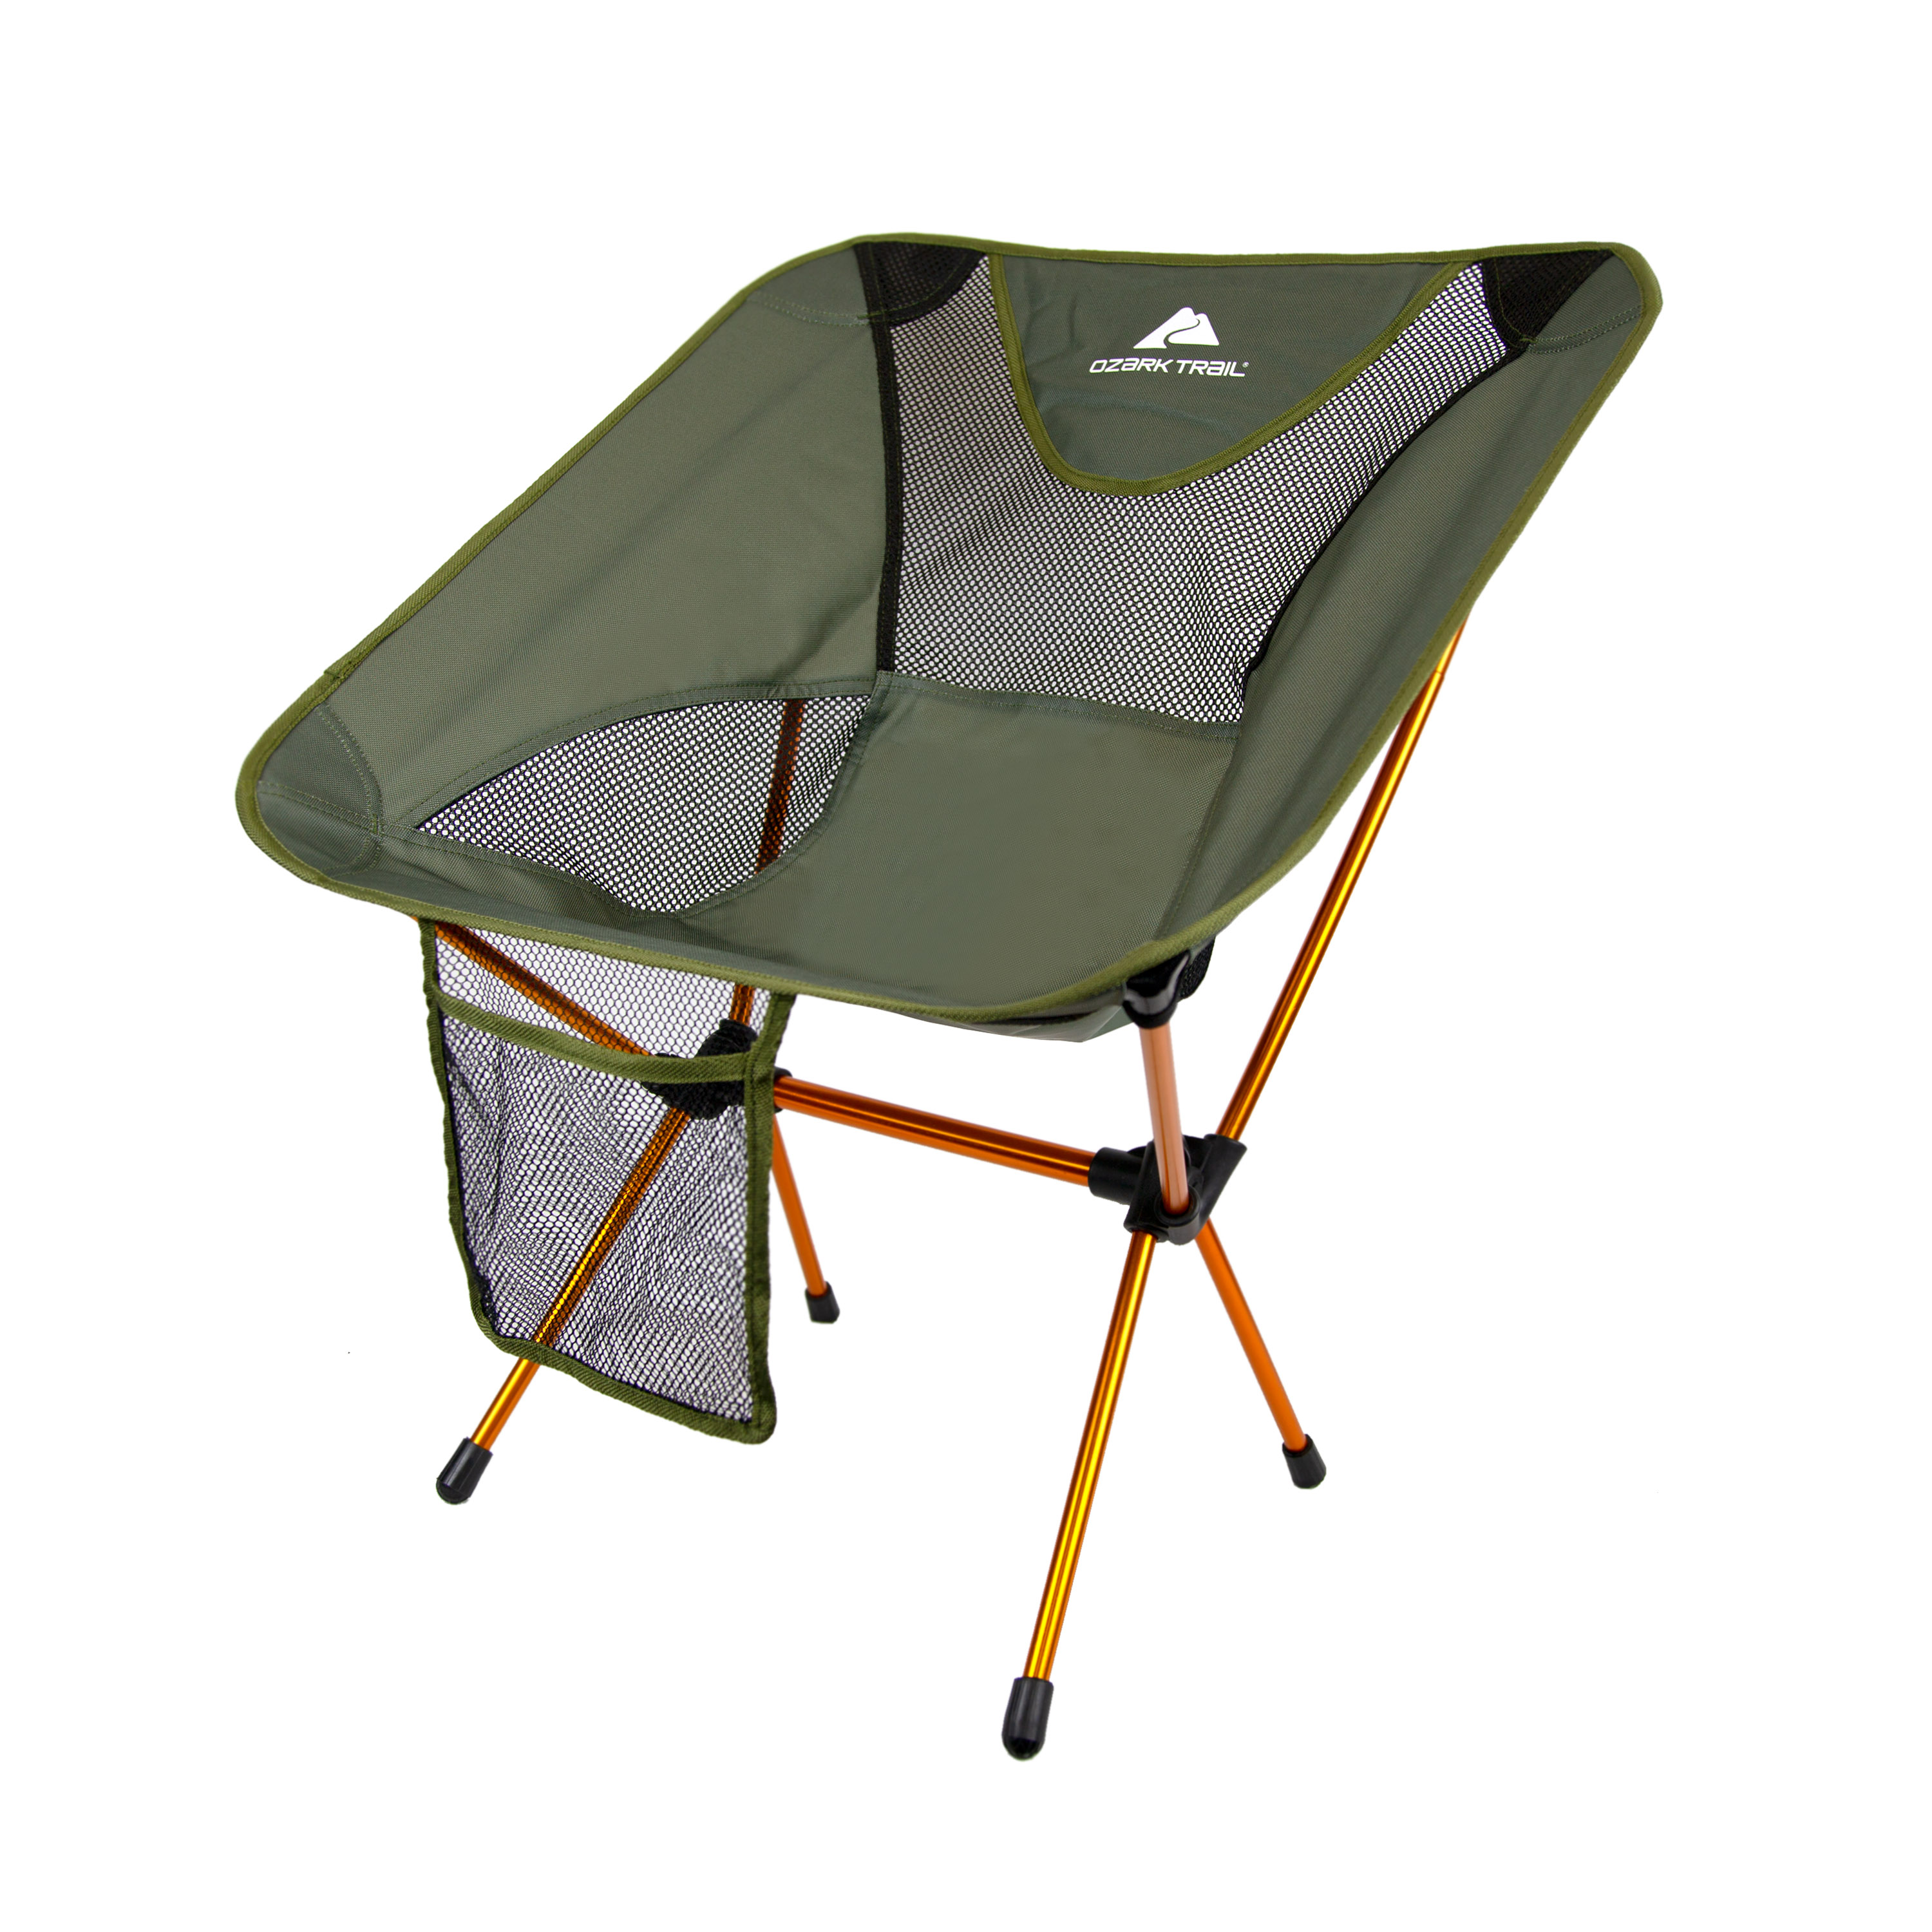 Ozark Trail Himont Compact Camp Lite Chair Set for Camping - Single chair, Green - image 1 of 11